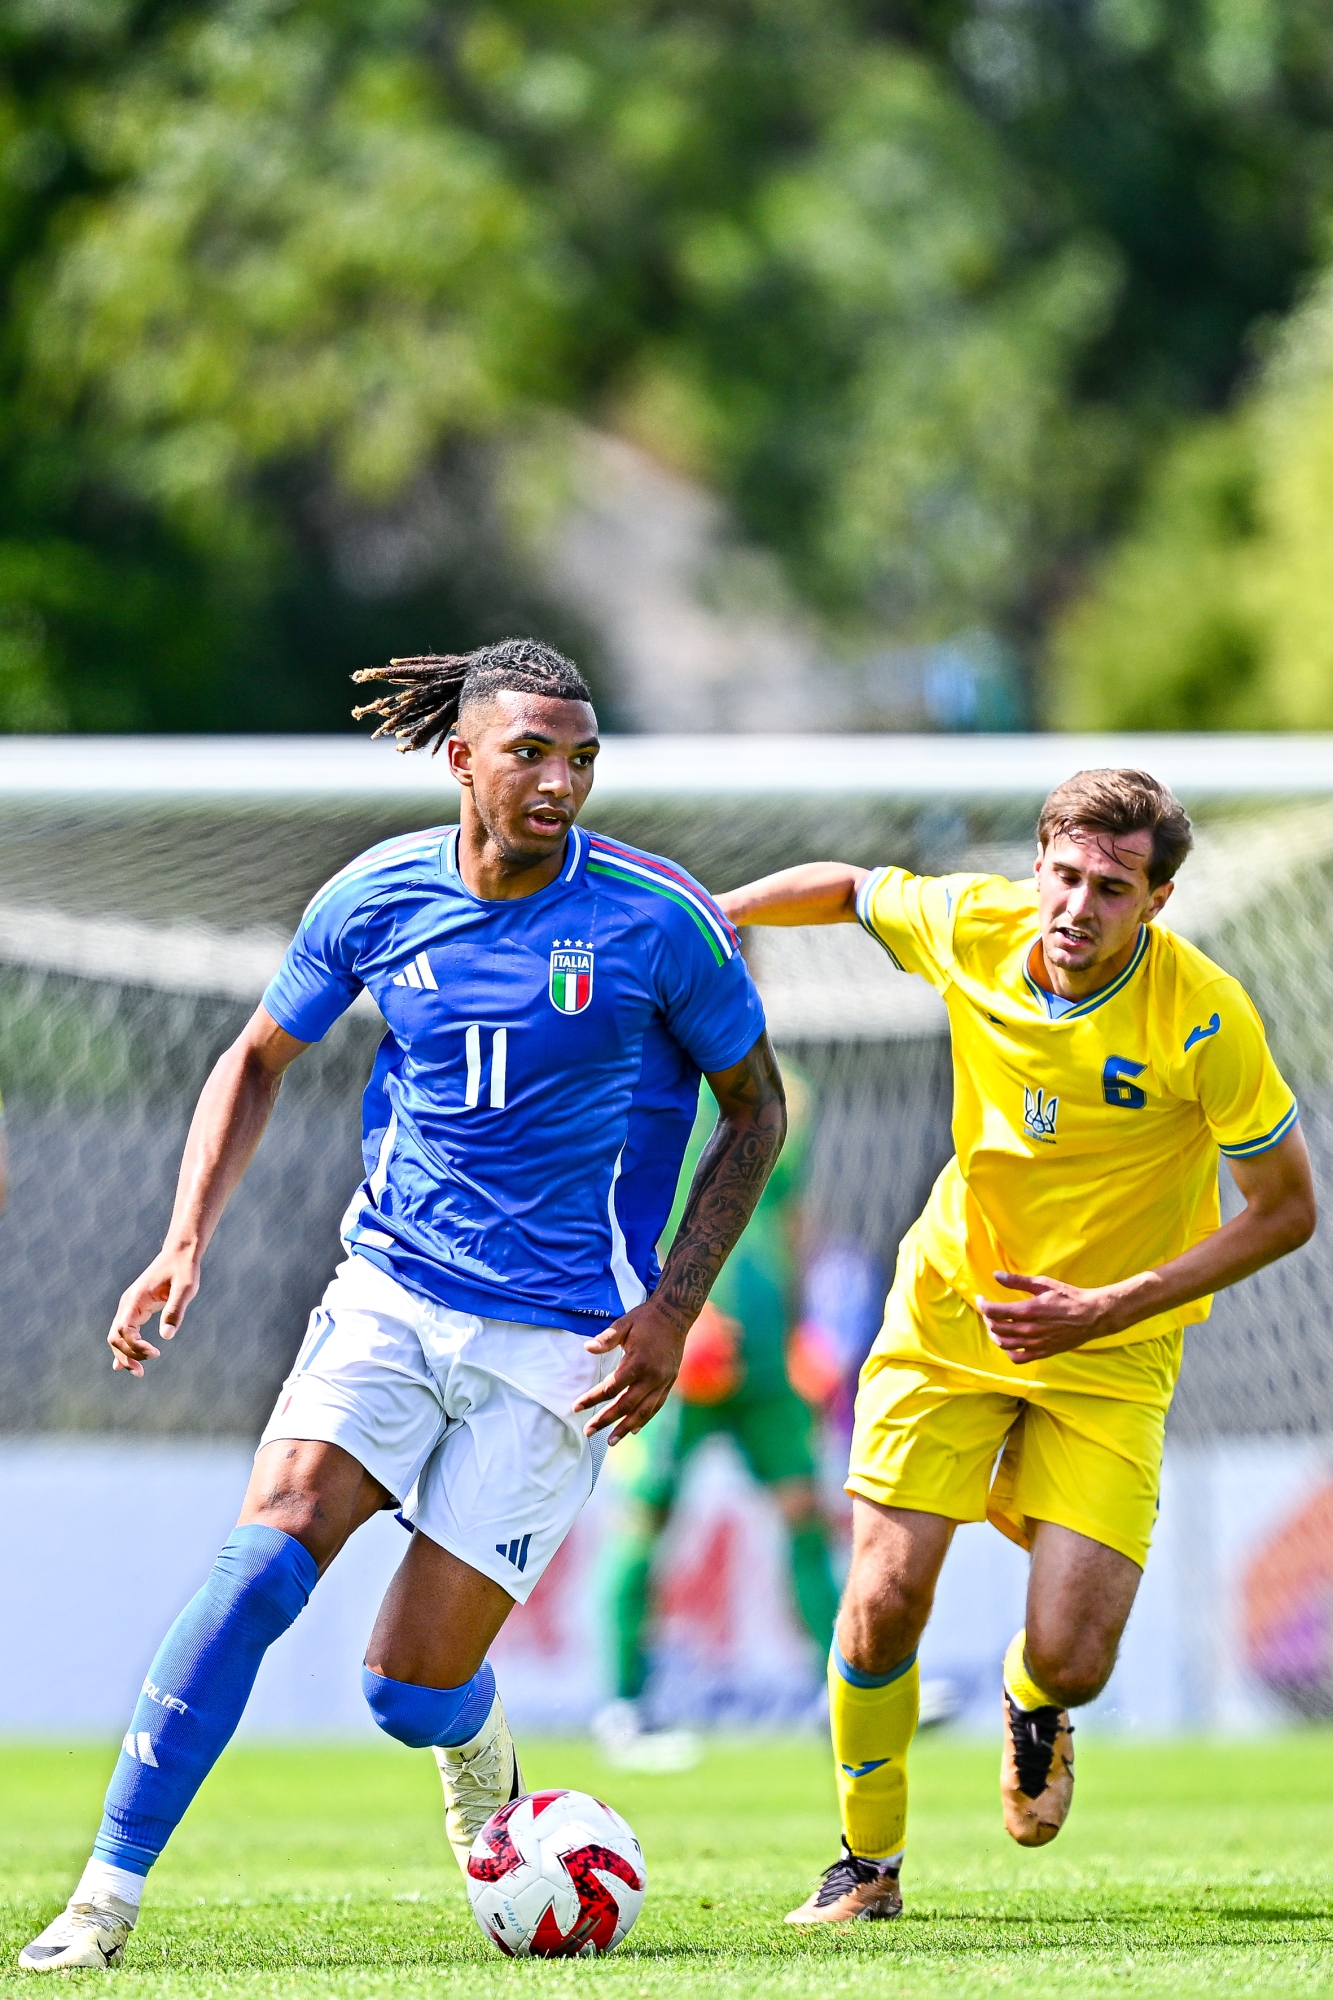 AUBAGNE, FRANCE - JUNE 6: Cher Ndour of Italy U21 (left) and Denys Shostak of Ukraine U21 vie for the ball during the 50th Tournoi Maurice Revello match between Ukraine U21 and Italy U21 at Stade de Lattre on June 6, 2024 in Aubagne, France.  (Photo by Simone Arveda/Getty Images)